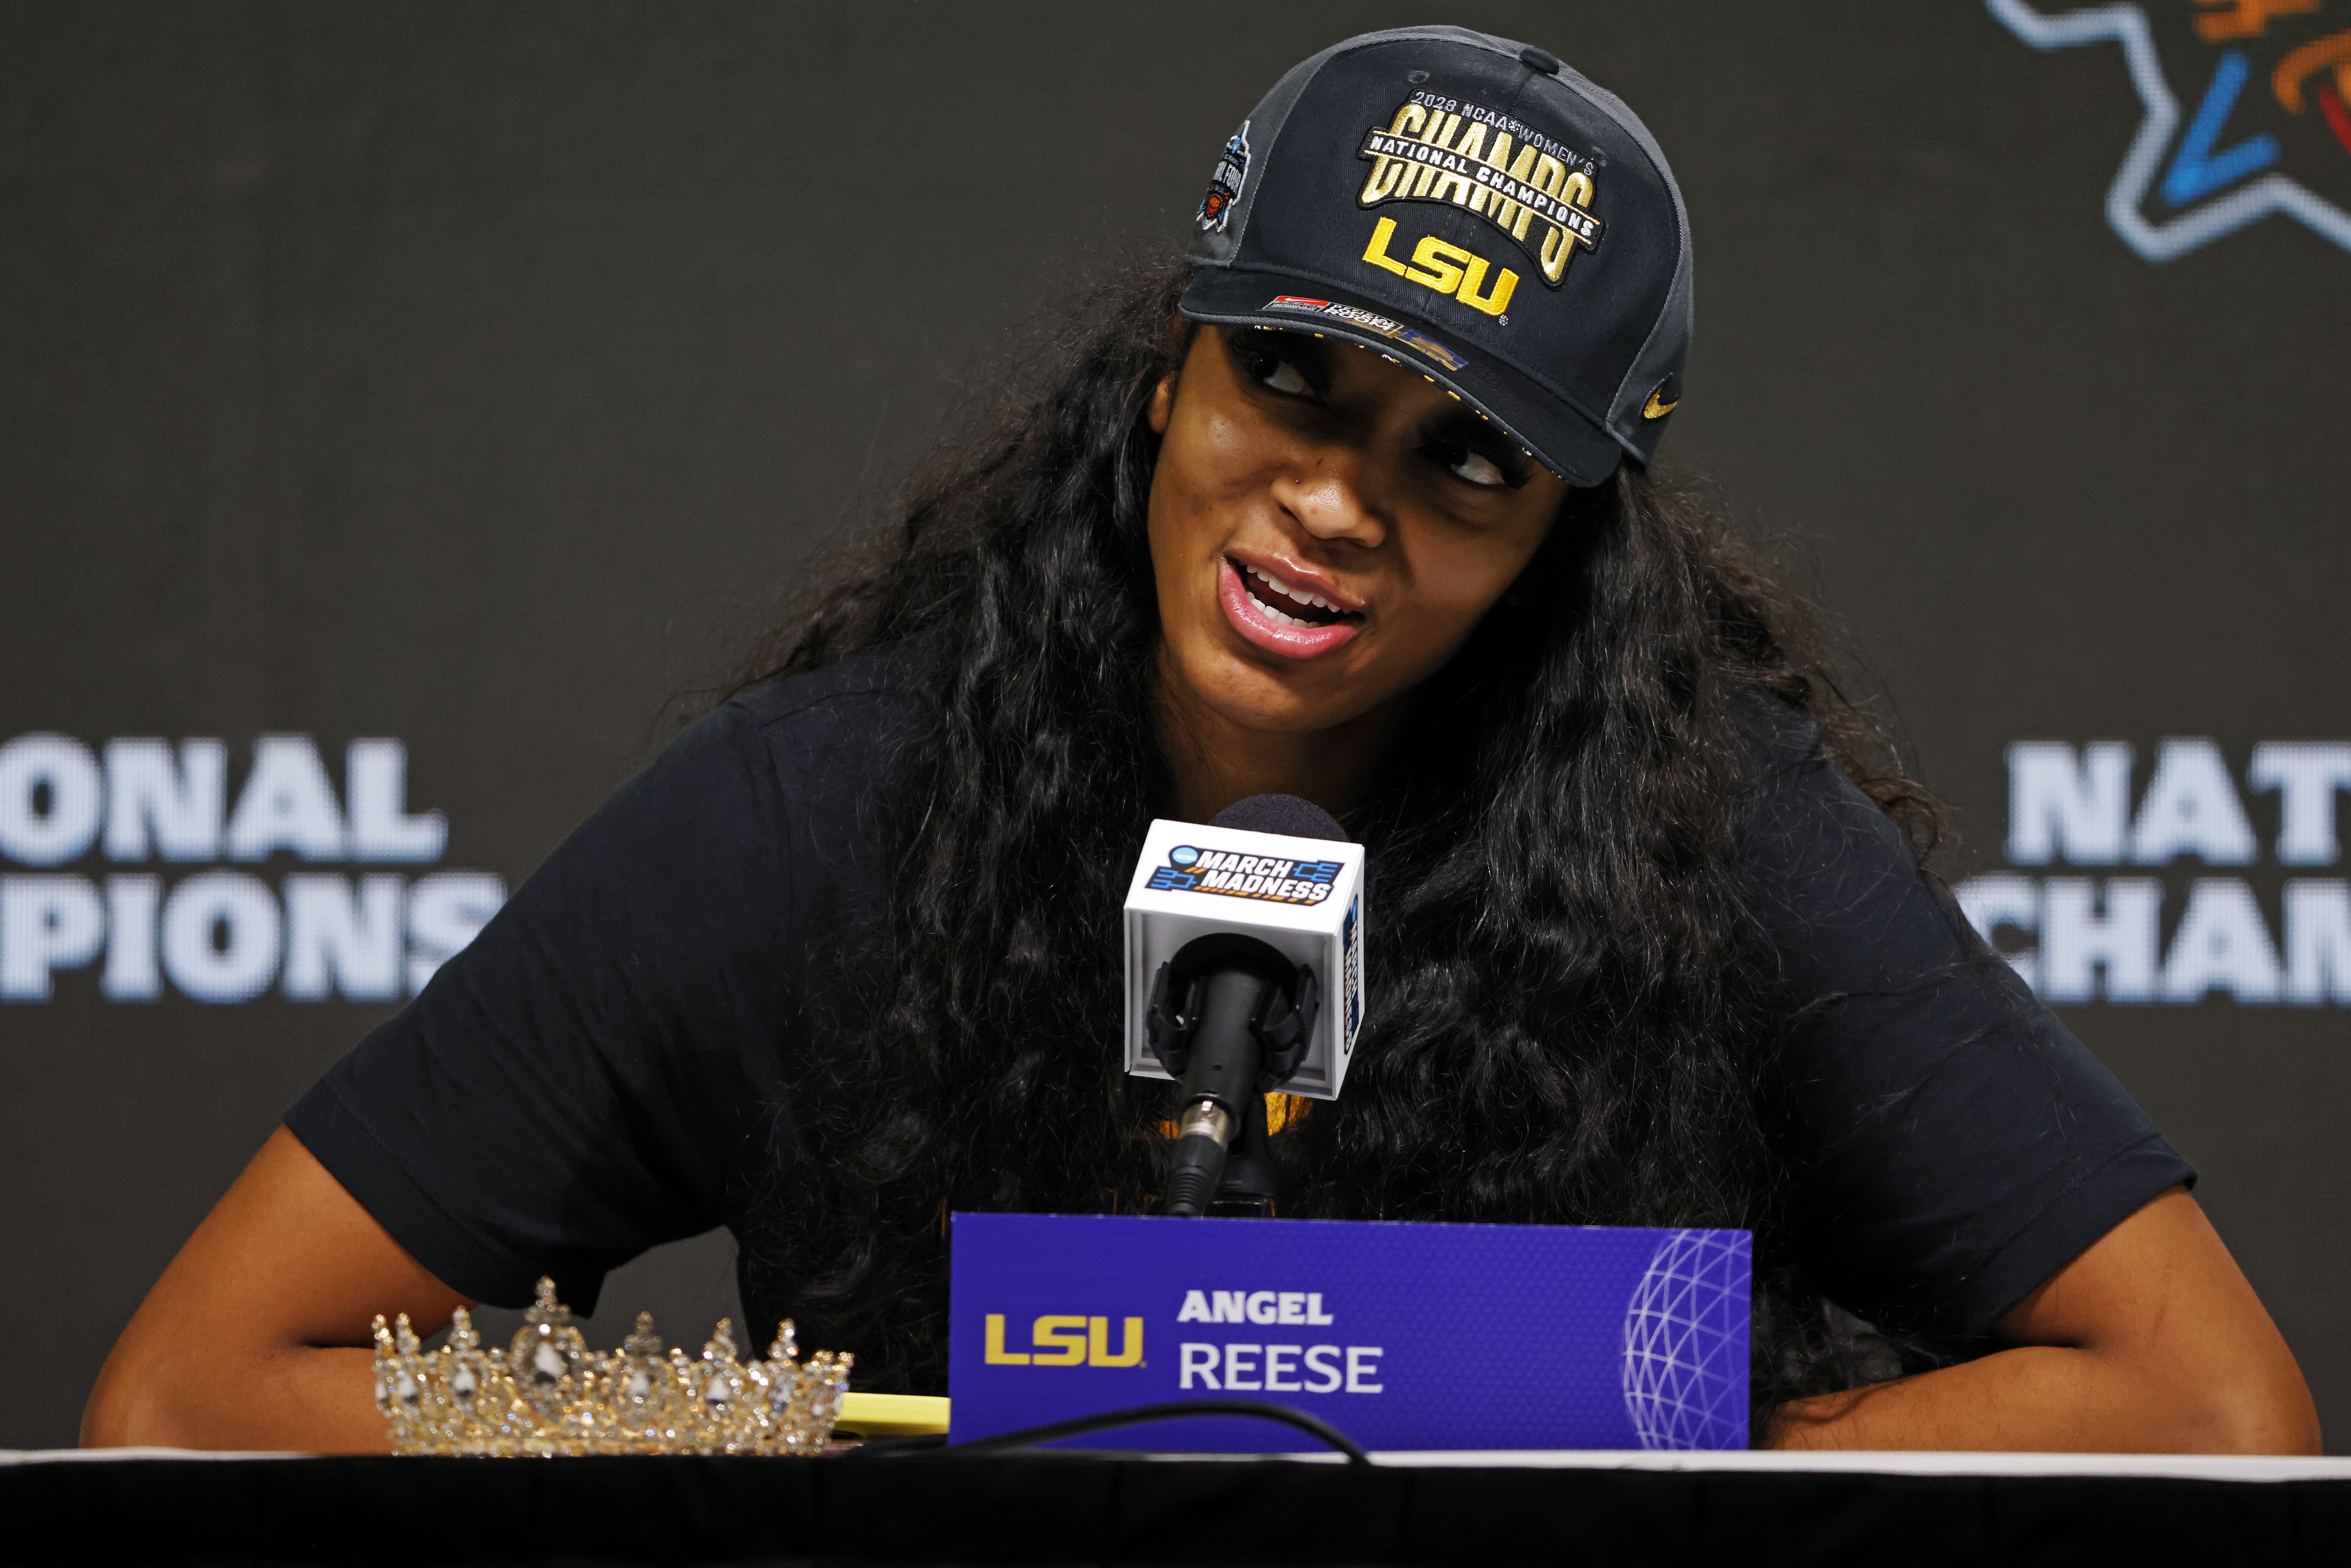 Angel Reese ‘in no rush’ to get to WNBA after winning championship at LSU